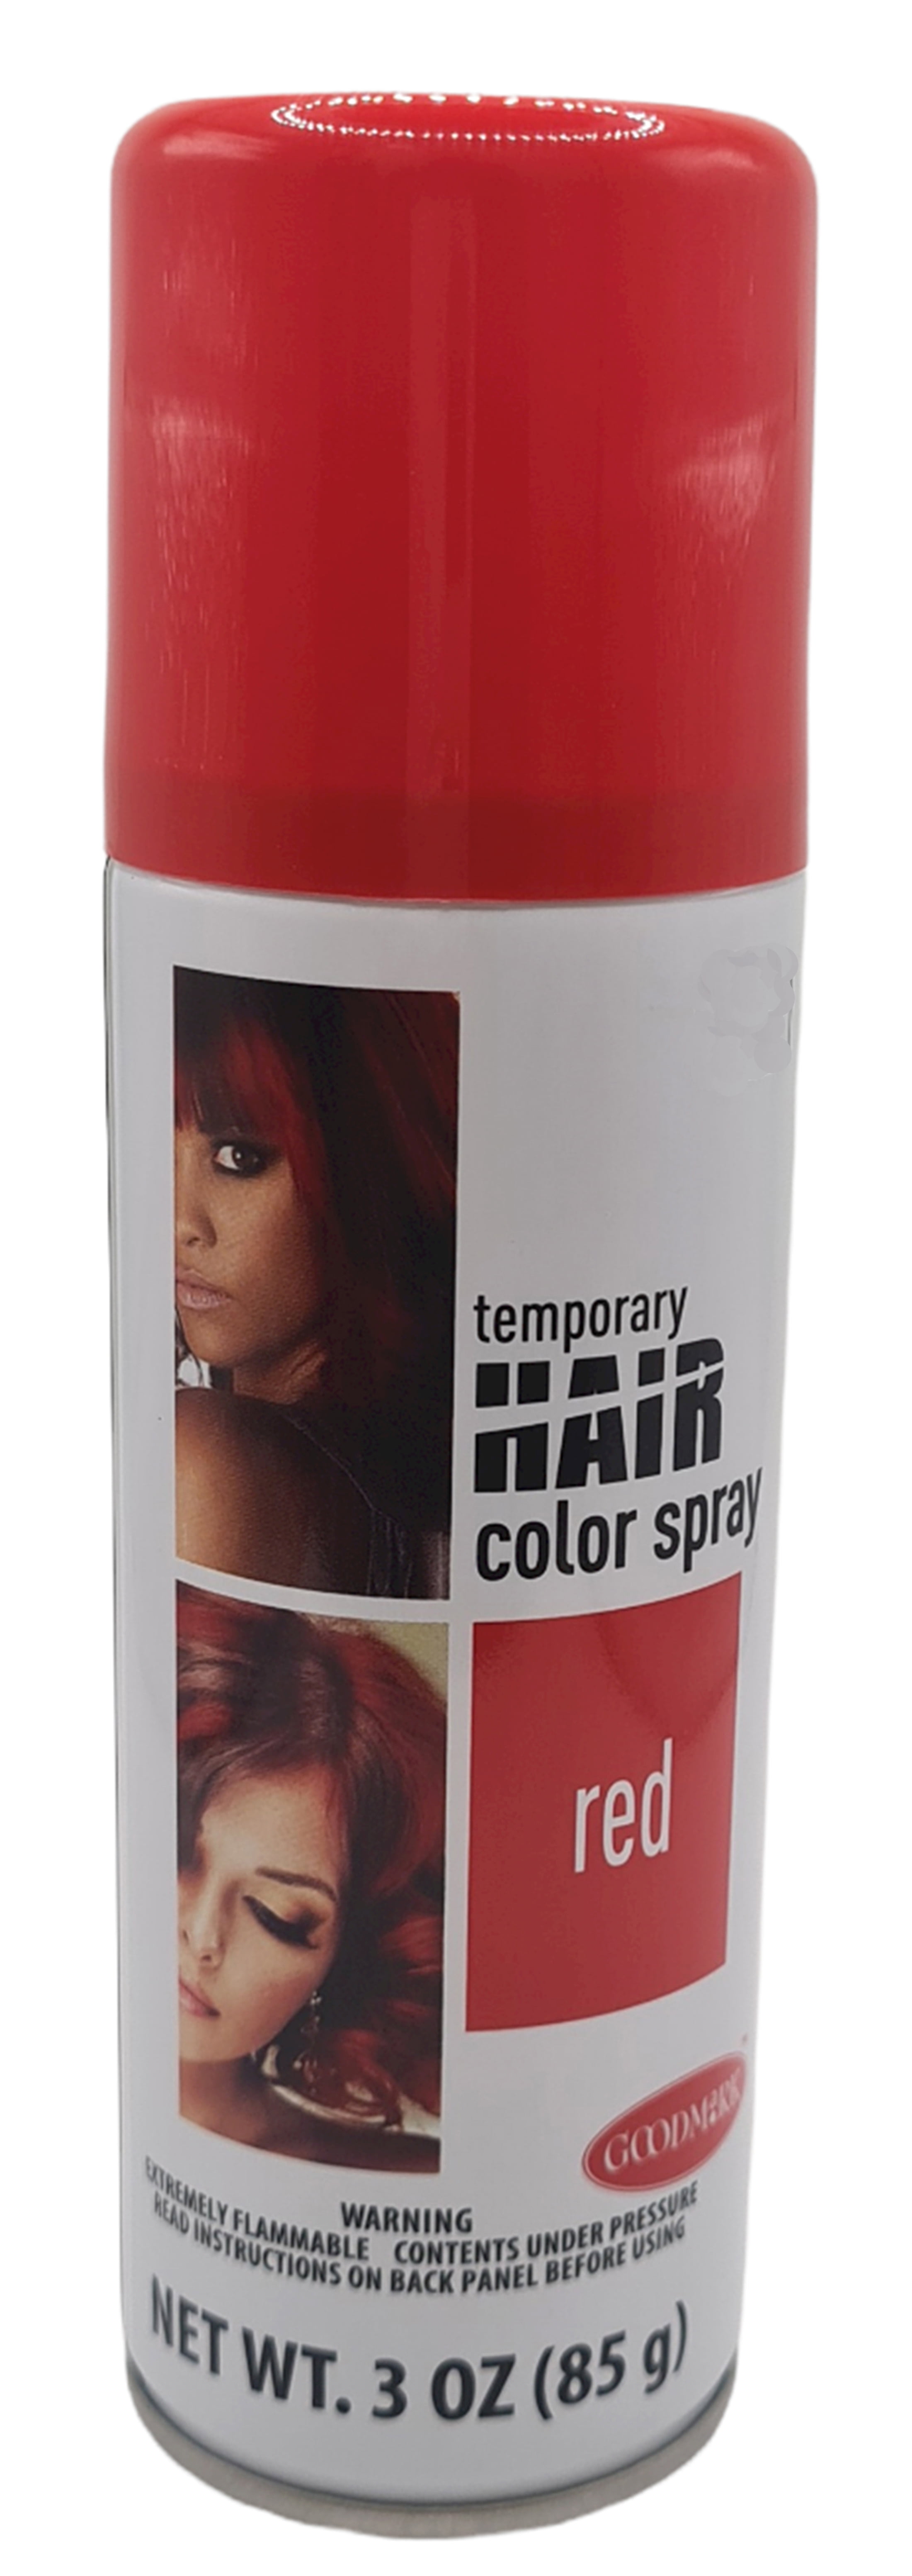 Bright Color Hair Spray Glitter Green Temporary Hair Color Make-Up